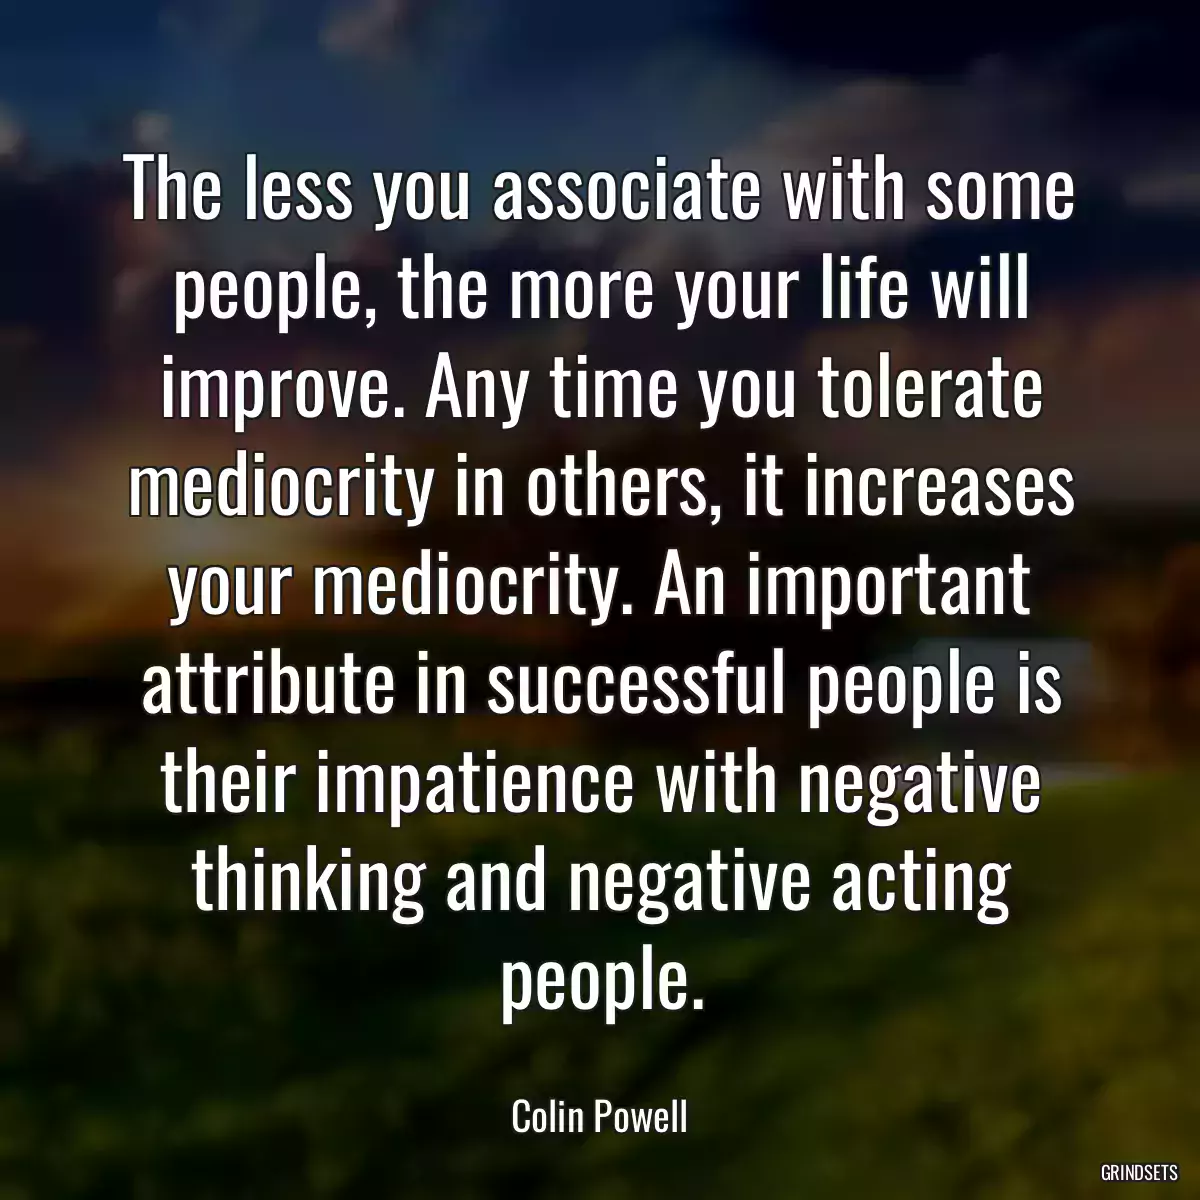 The less you associate with some people, the more your life will improve. Any time you tolerate mediocrity in others, it increases your mediocrity. An important attribute in successful people is their impatience with negative thinking and negative acting people.